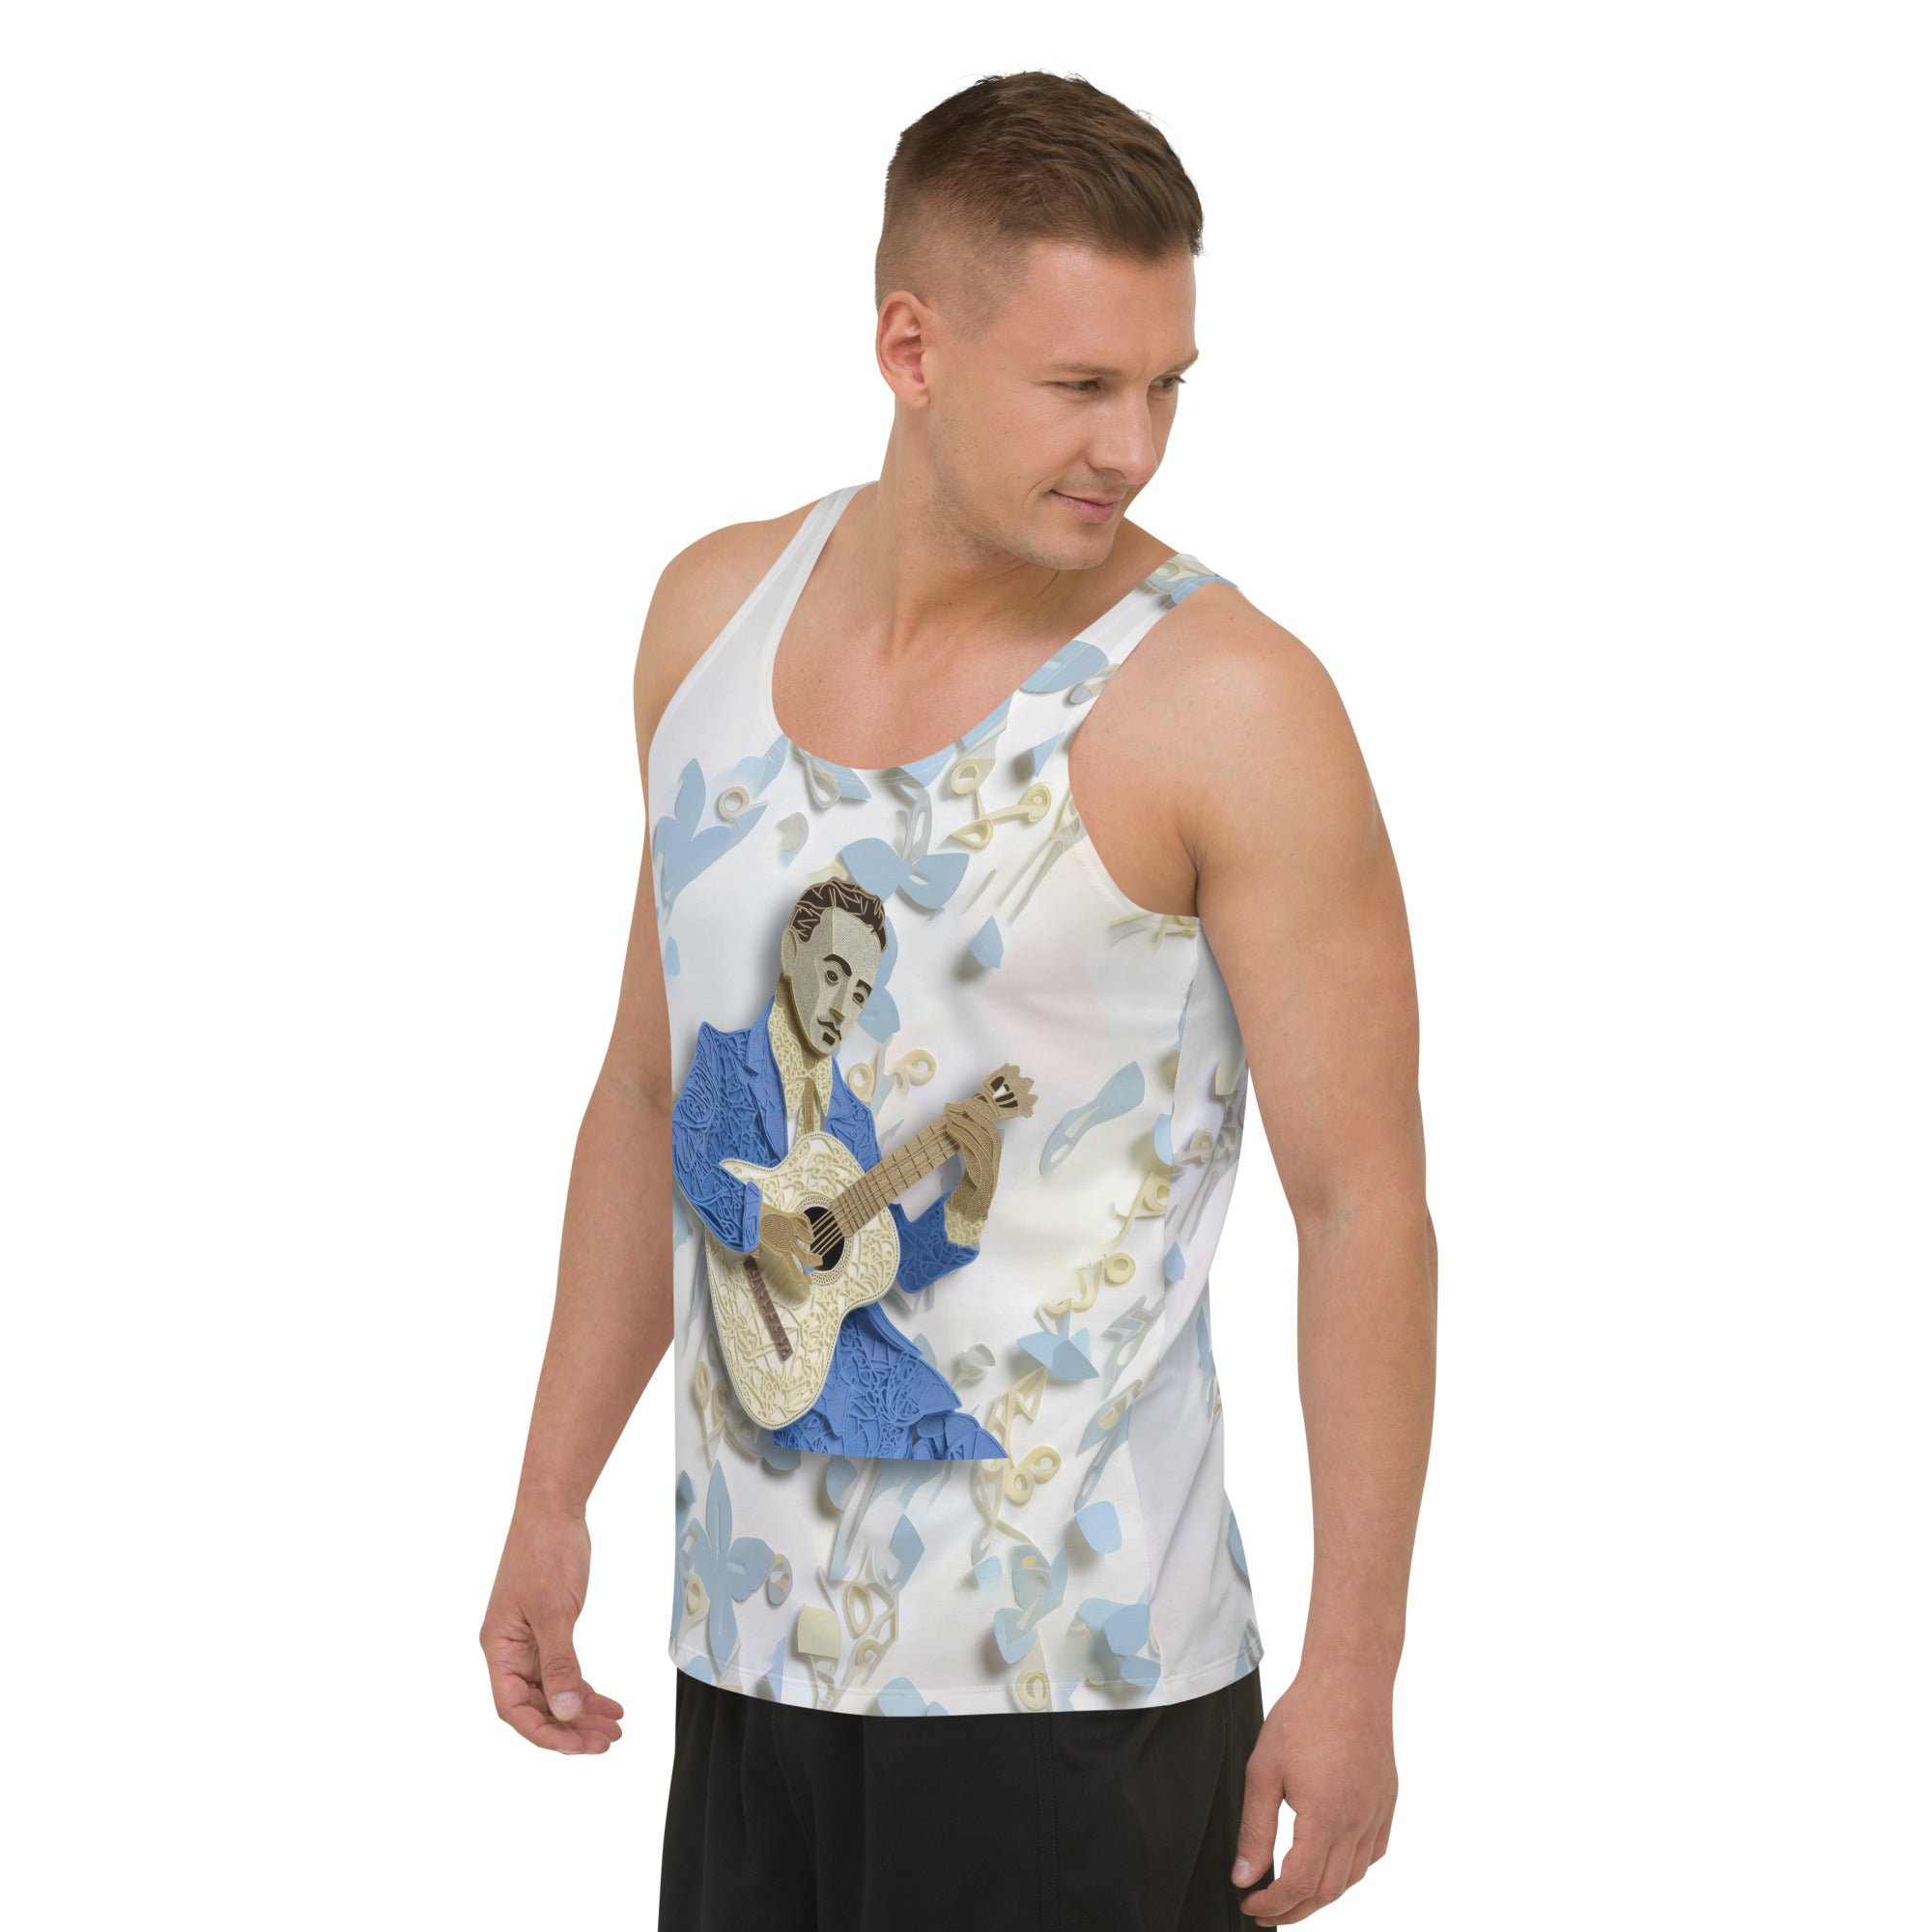 Electro Beat men's tank top front view in athletic style.